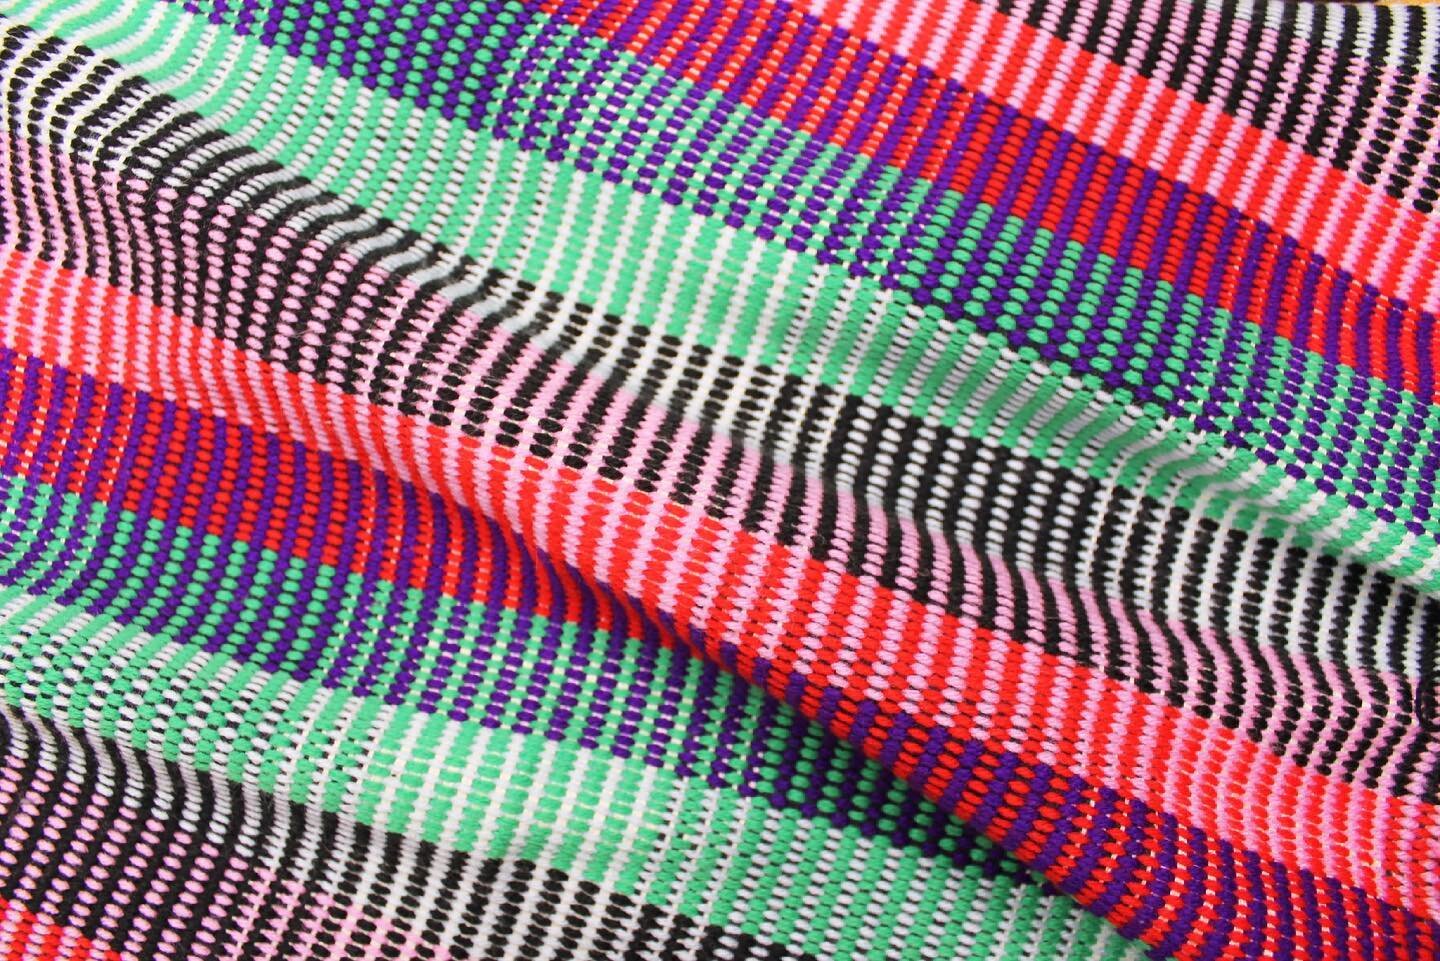 We&rsquo;re busy planning our exhibition for @wearepremierevision Paris this September, fingers crossed everything is able to go ahead 🤞🤞

#interiorfabric #fashionfabric #wovendesign #textiledesign #weaversofinstagram #handwoven #colour #stripes #f